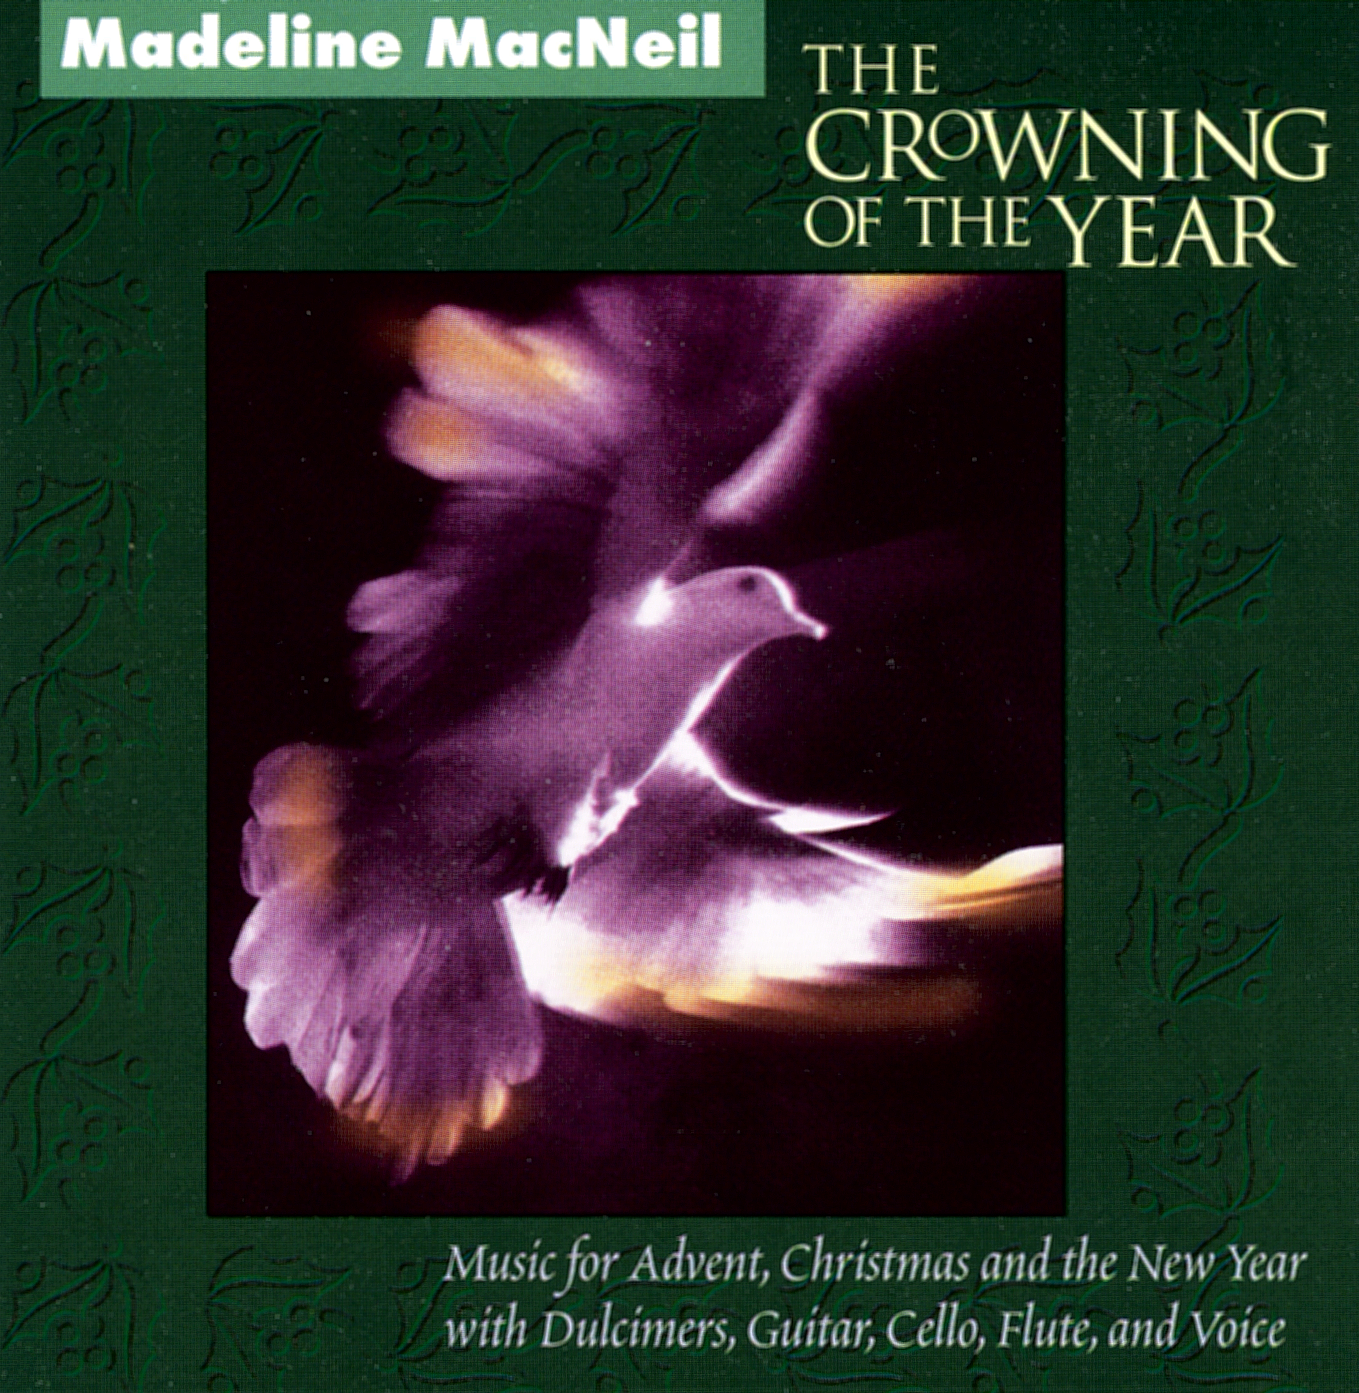 
Madeline MacNeil's CD The Crowning Of The Year (1996)